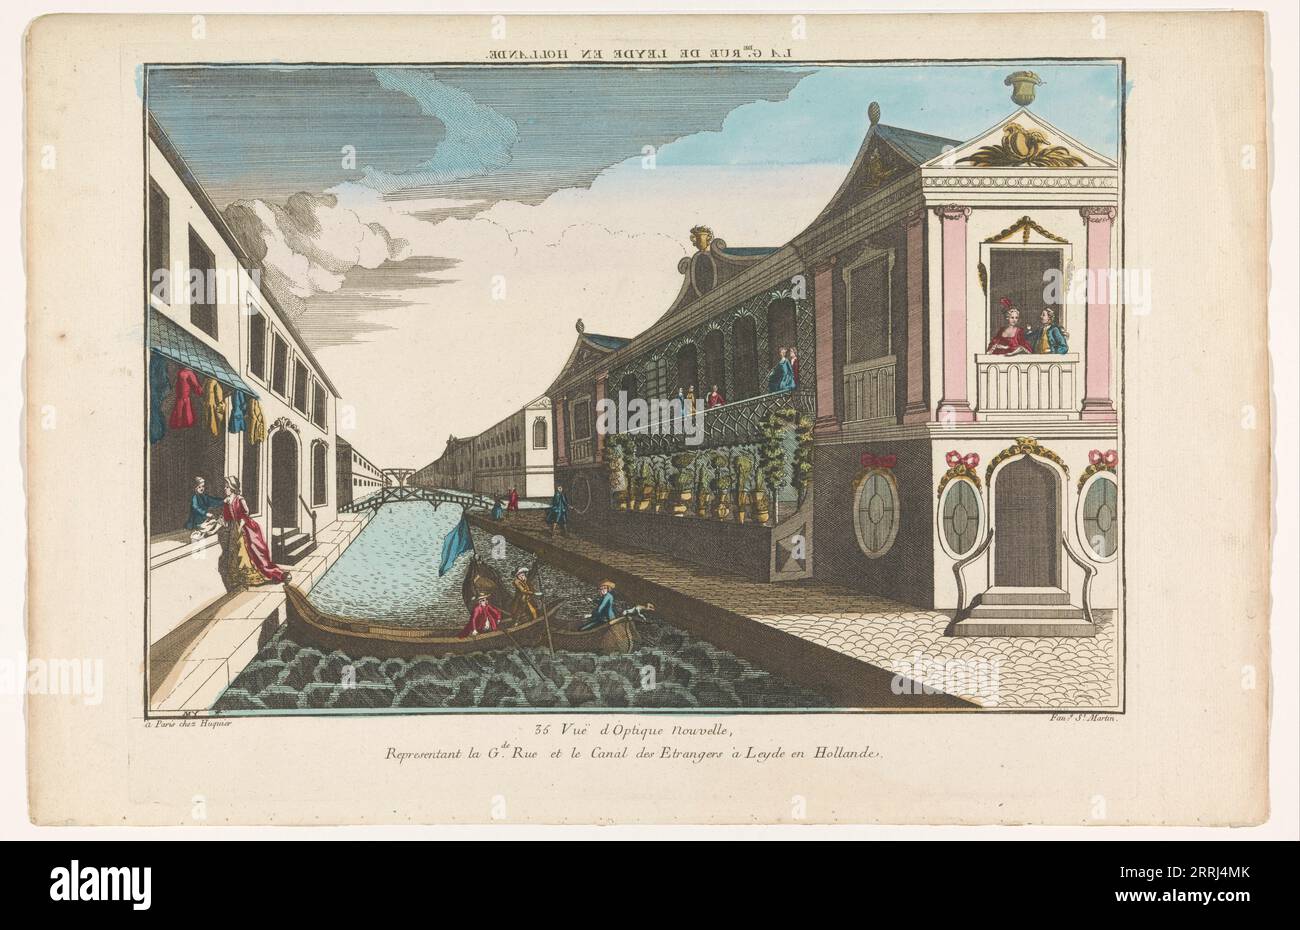 View of a street on a canal in Leiden, 1735-1805. Stalls with merchandise on display. Two rowing boats. Stock Photo